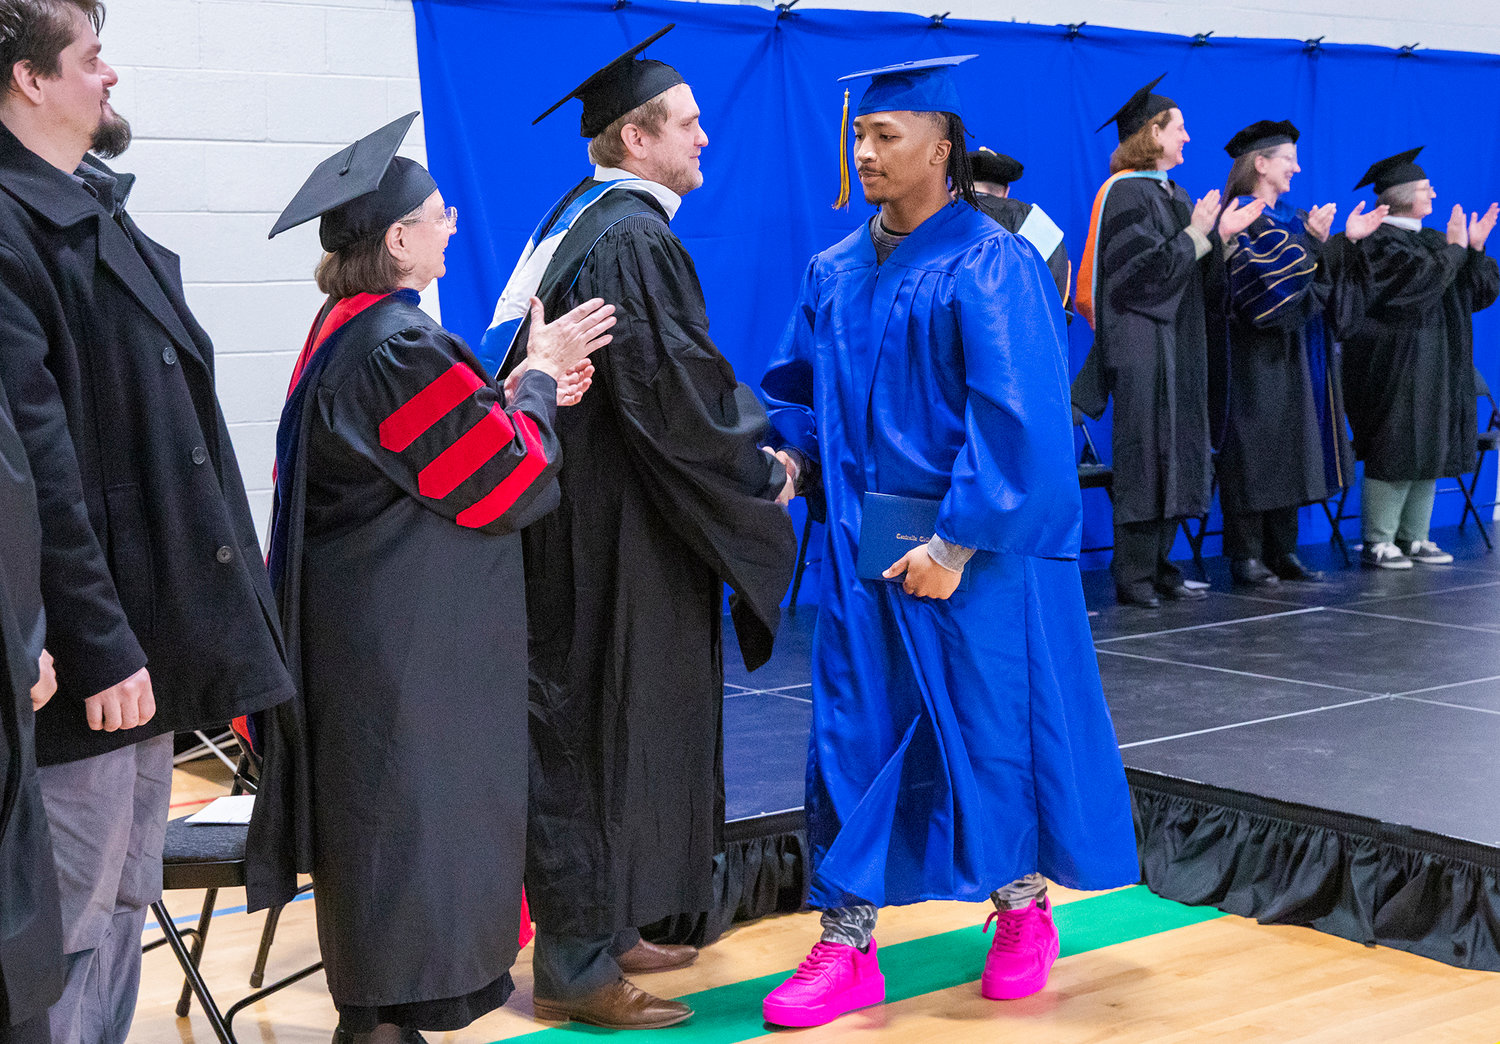 Chisten Ativalu-Ford shakes hands with Austin Majors after receiving his diploma on stage during a graduation ceremony for Centralia College graduates held at the Green Hill School on Wednesday in Chehalis.